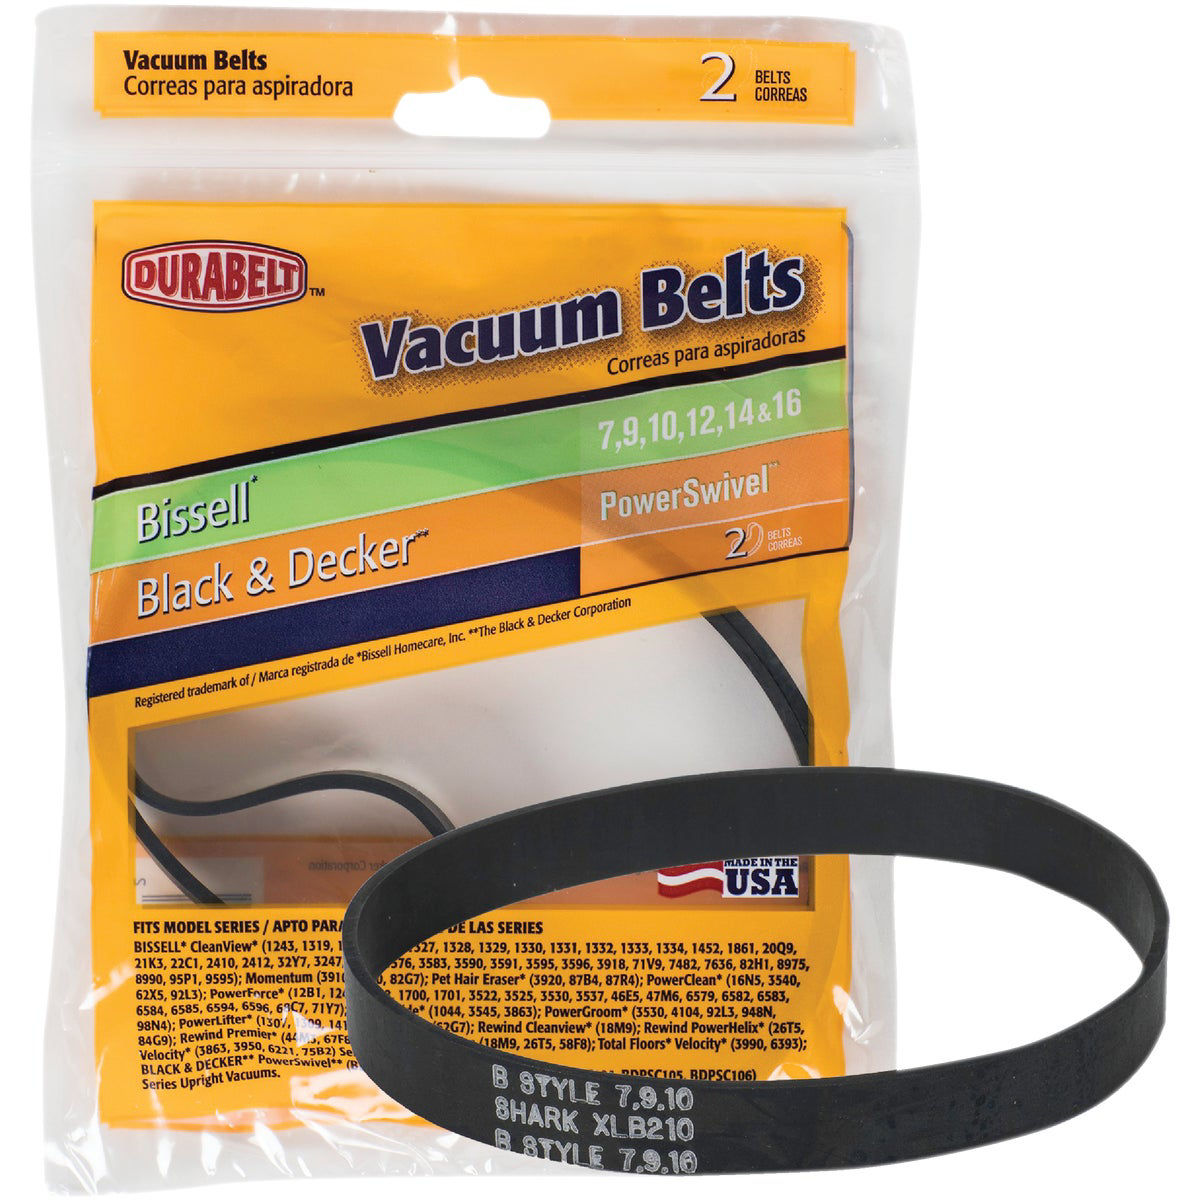 Bissell Style 7/9/10 Replacement Belts - More Than Vacuums